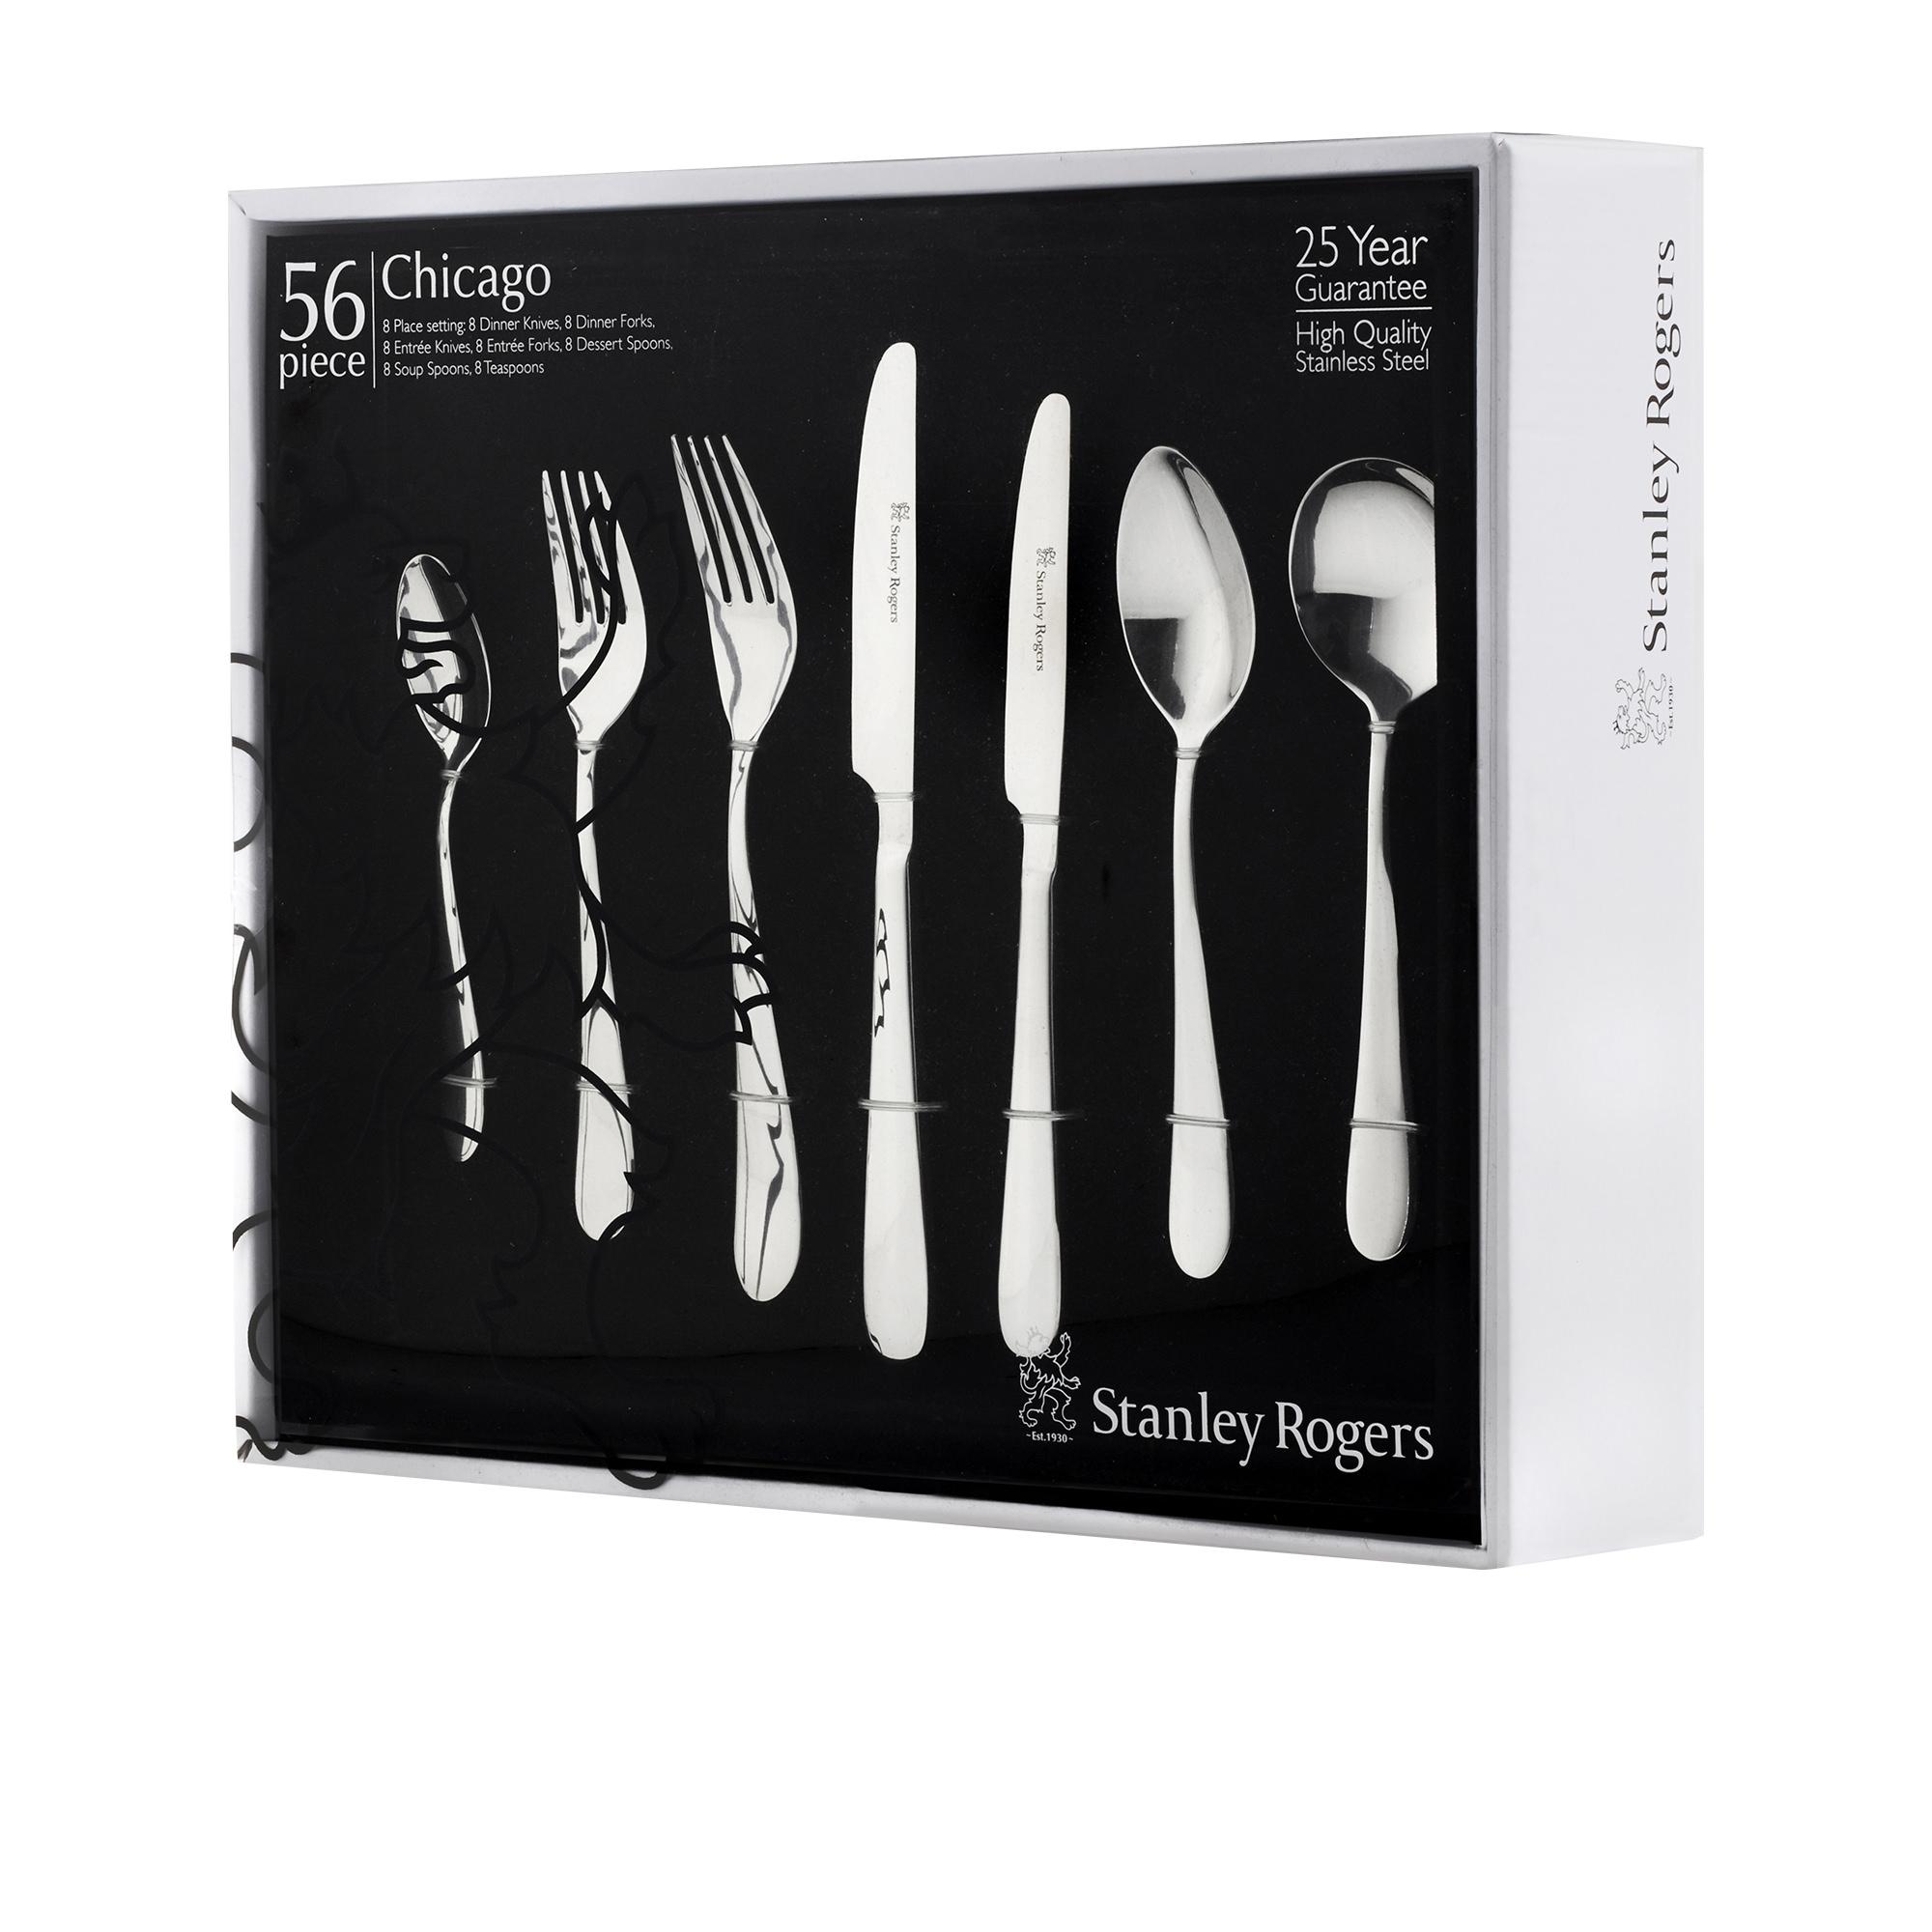 Stanley Rogers Chicago Cutlery Set 56pc Image 3